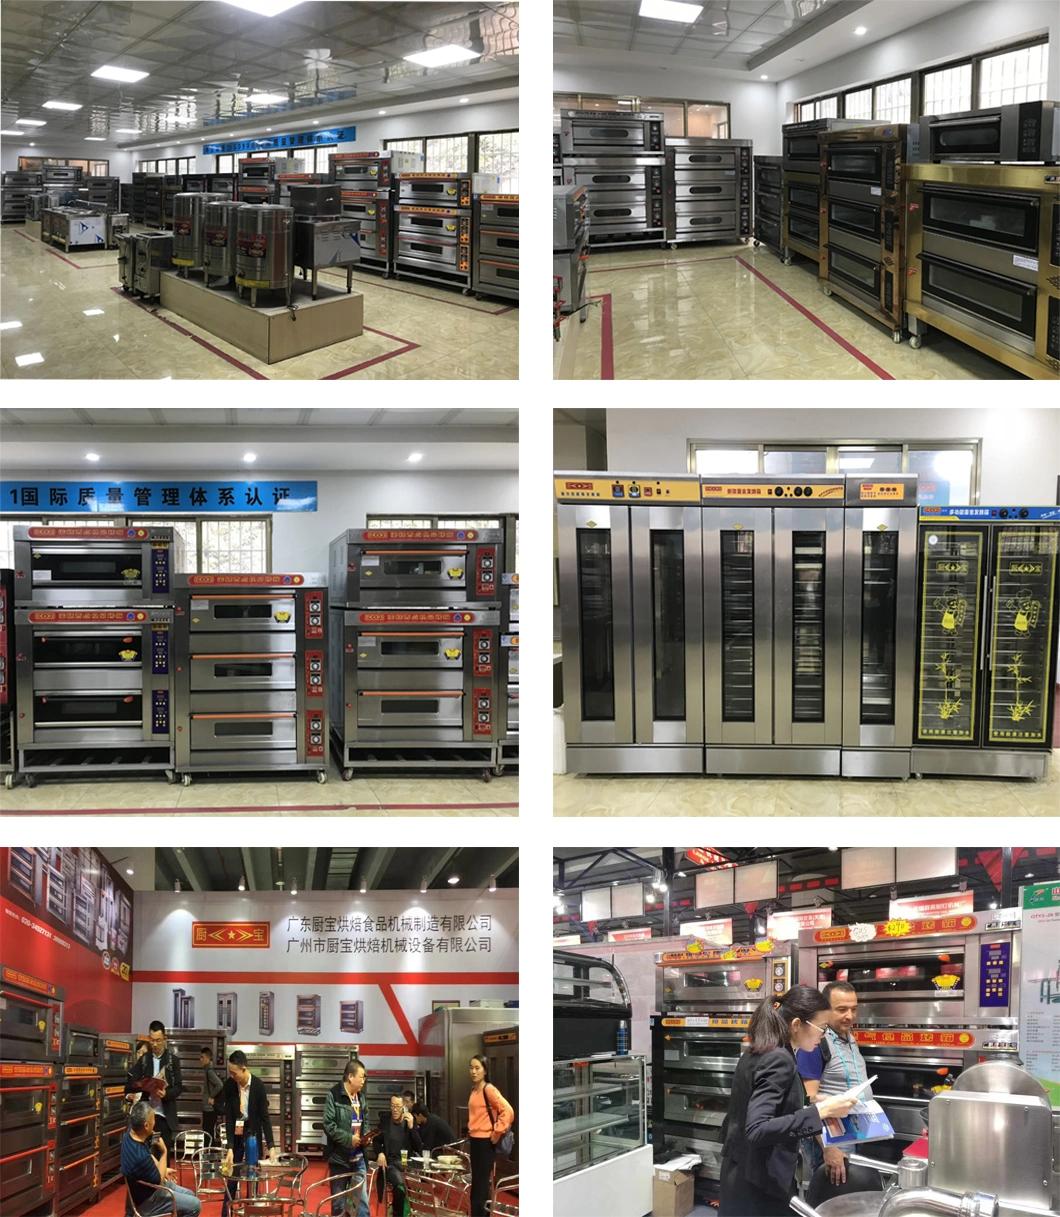 Commercial Kitchen 3 Deck 6 Trays Electric Oven for Restaurant Baking Equipment Bakery Machine Food Machinery